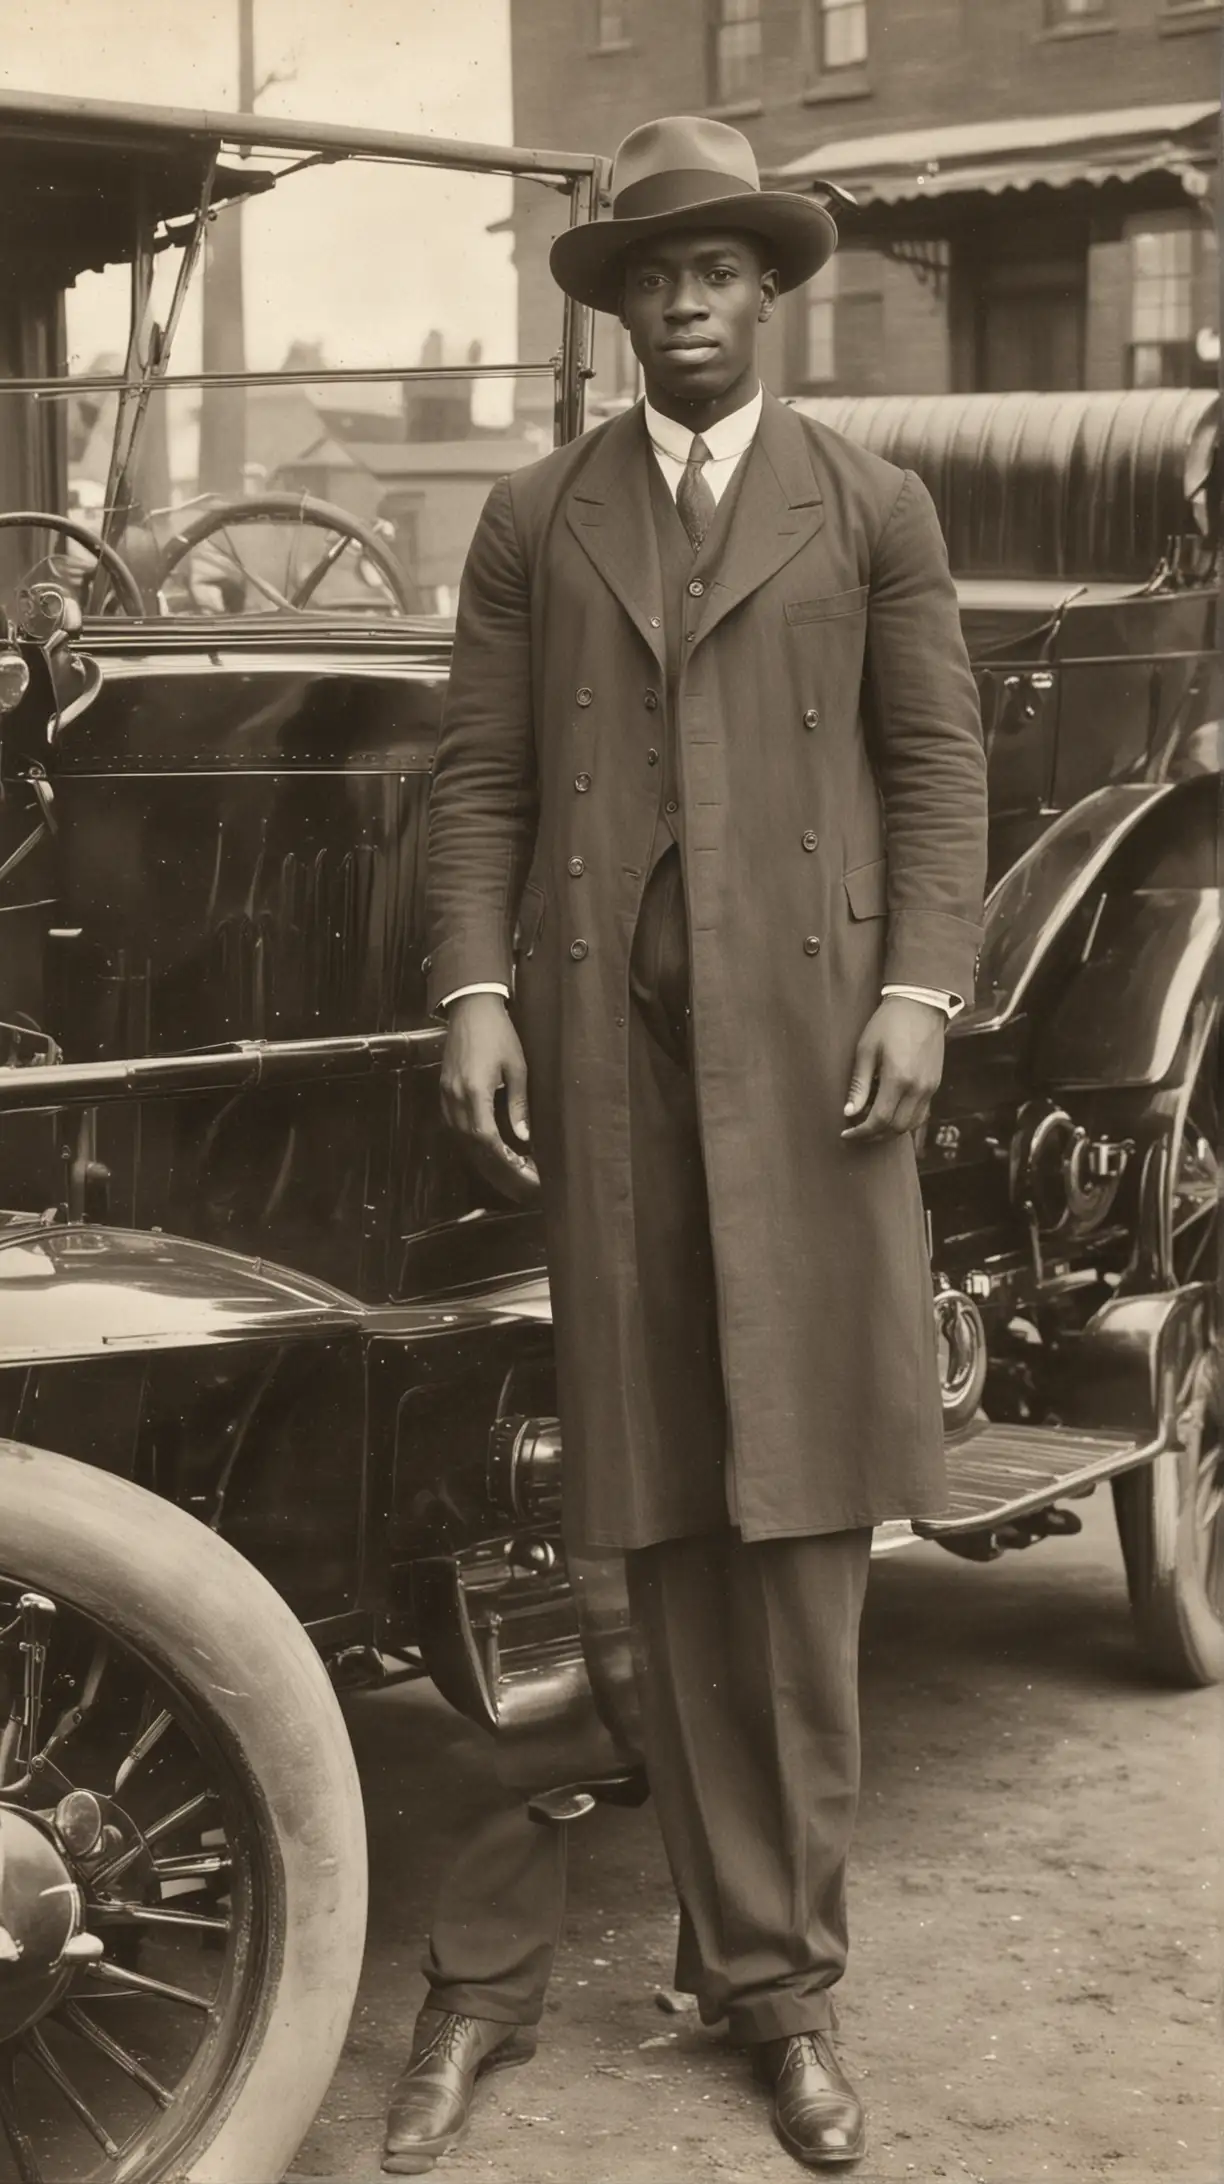 1915 PattersonGreenfield Automobile with Dapper Black Man